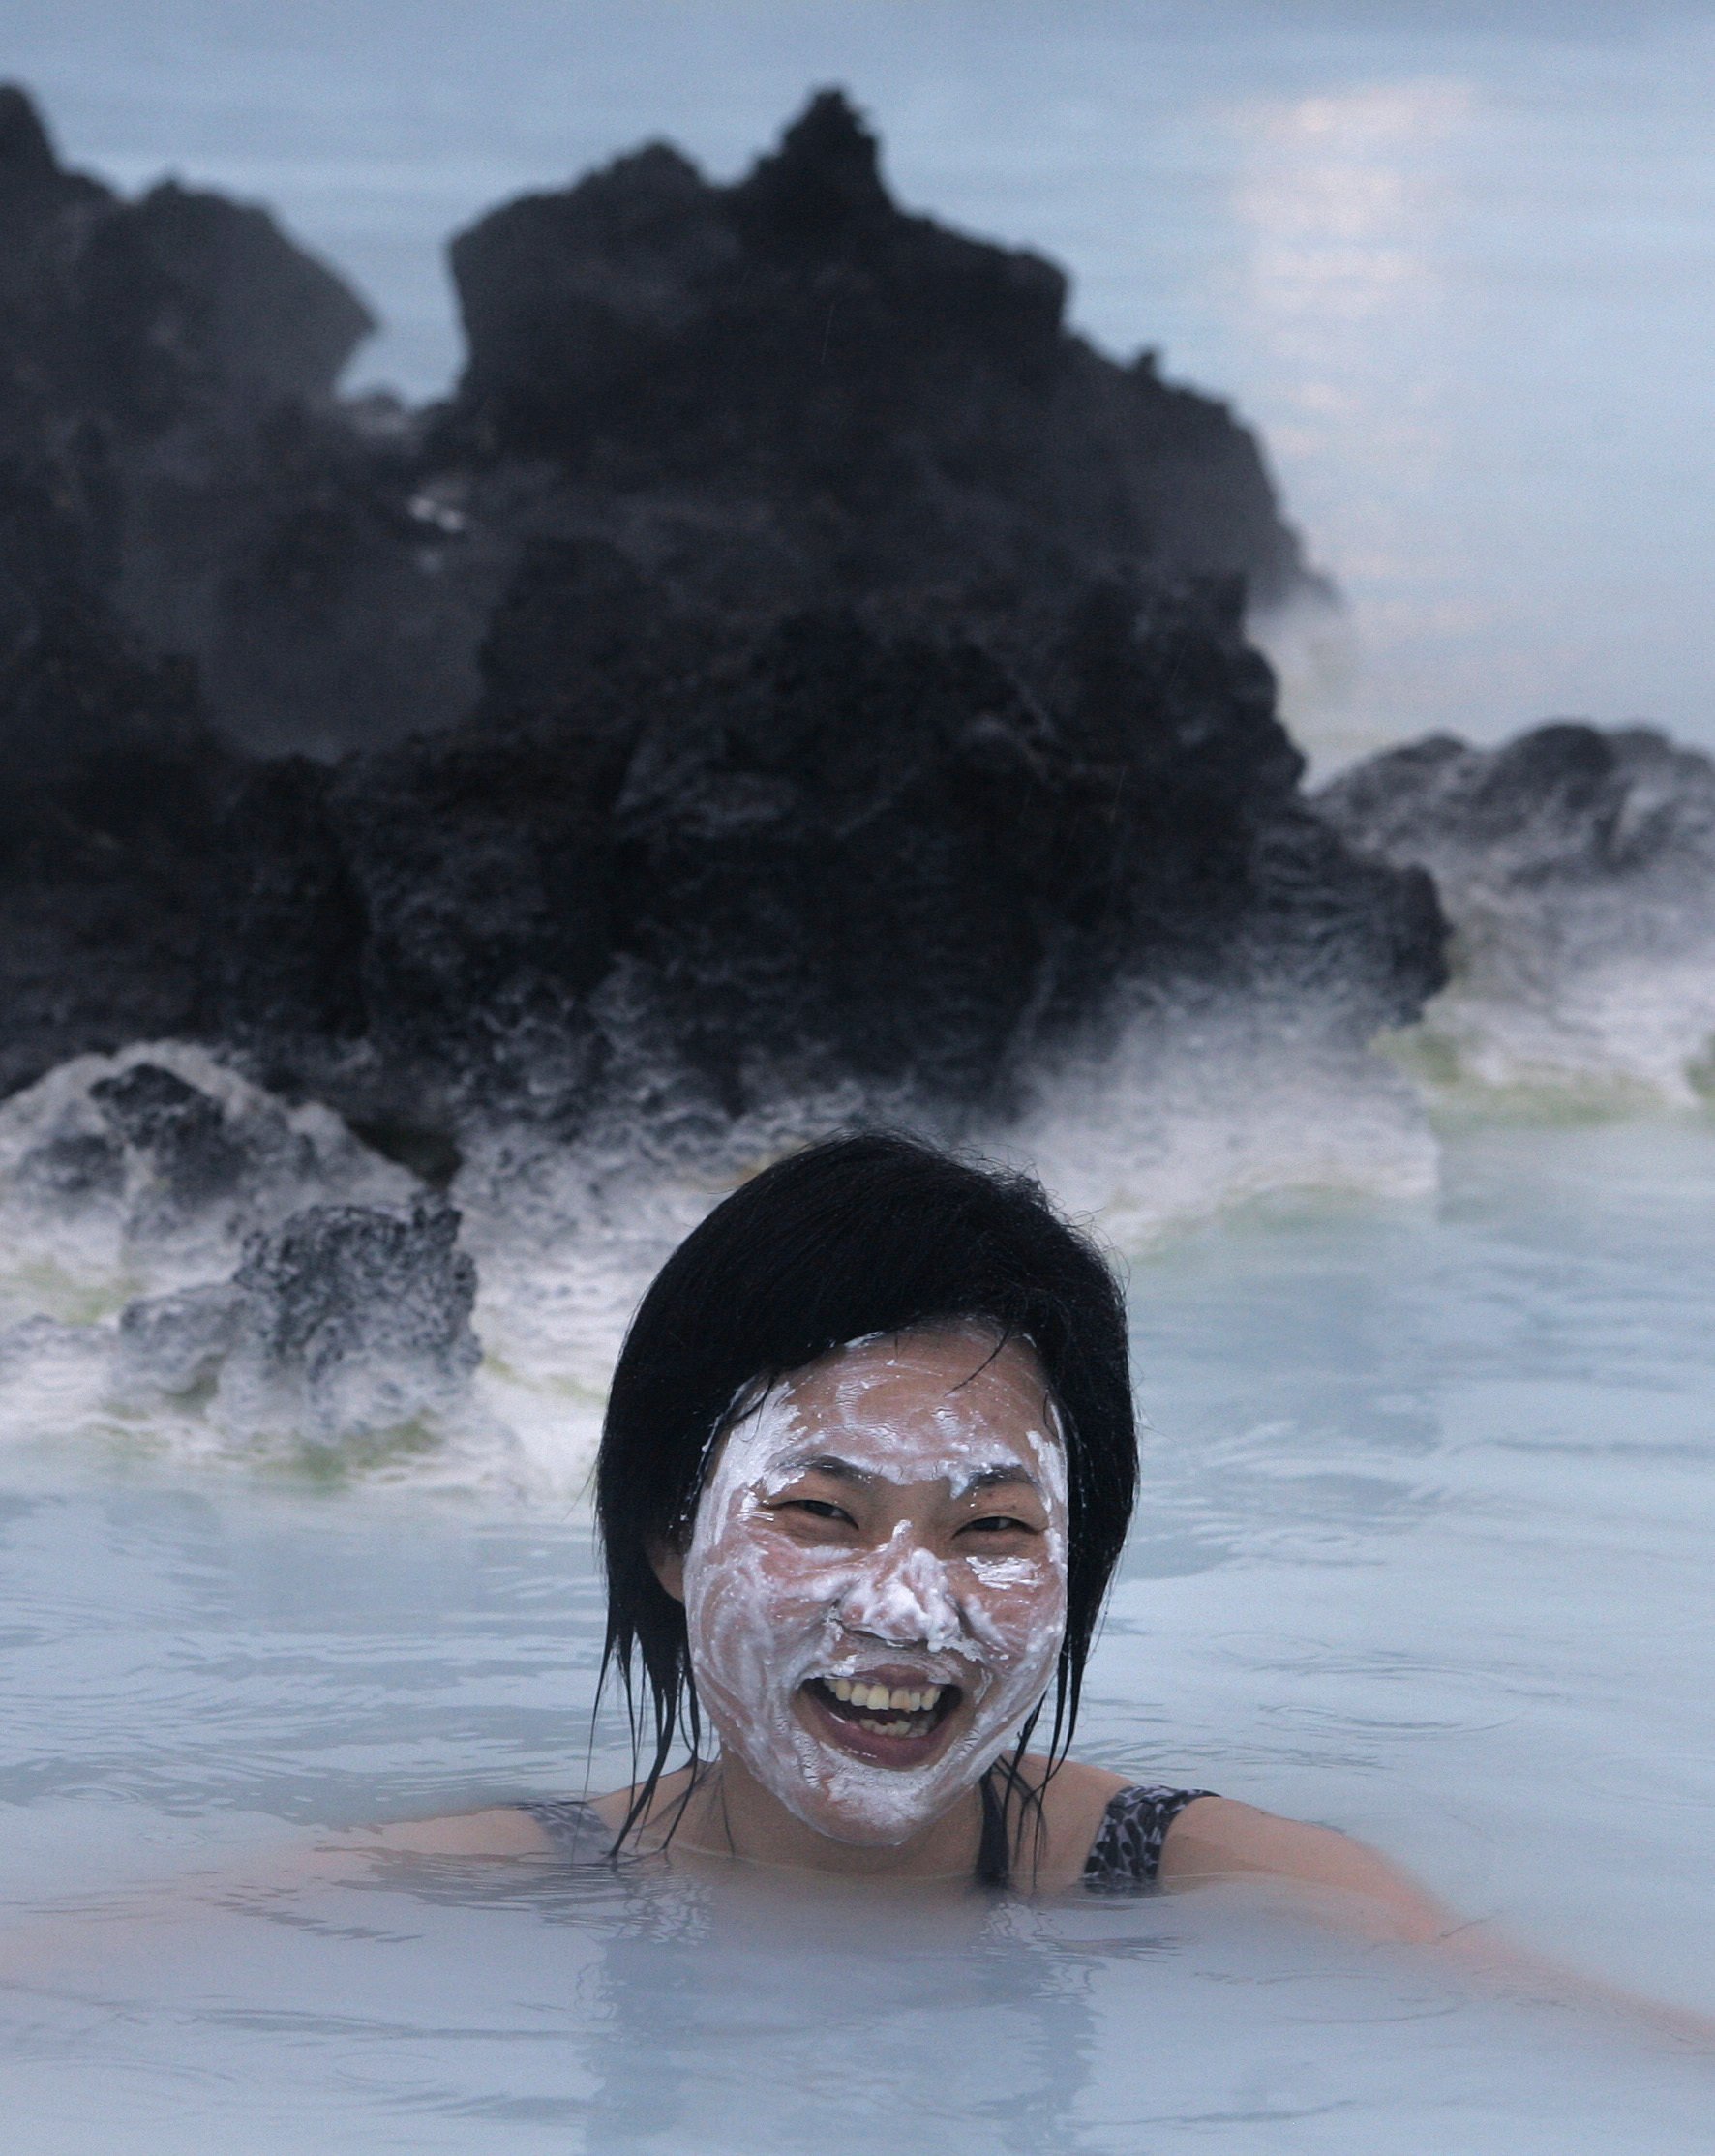 A tourist at the Blue Lagoon geothermal spa in Iceland. The spa has temporarily closed after a series of earthquakes put Iceland’s southwestern corner on volcano alert. Photo: AP